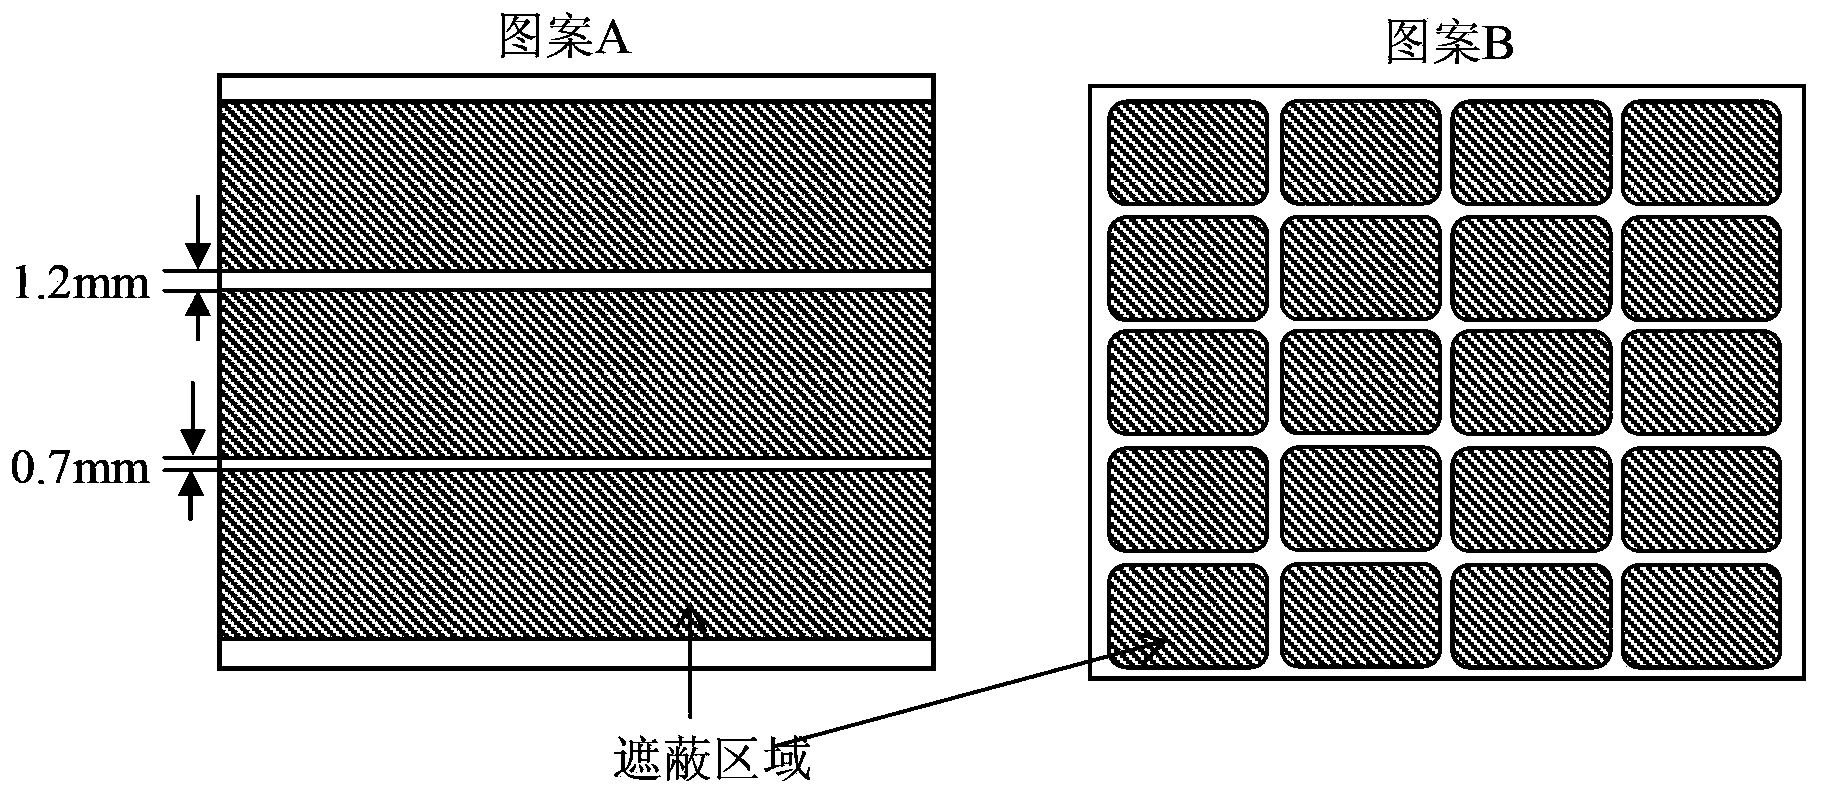 Method for etching cutting of glass substrate